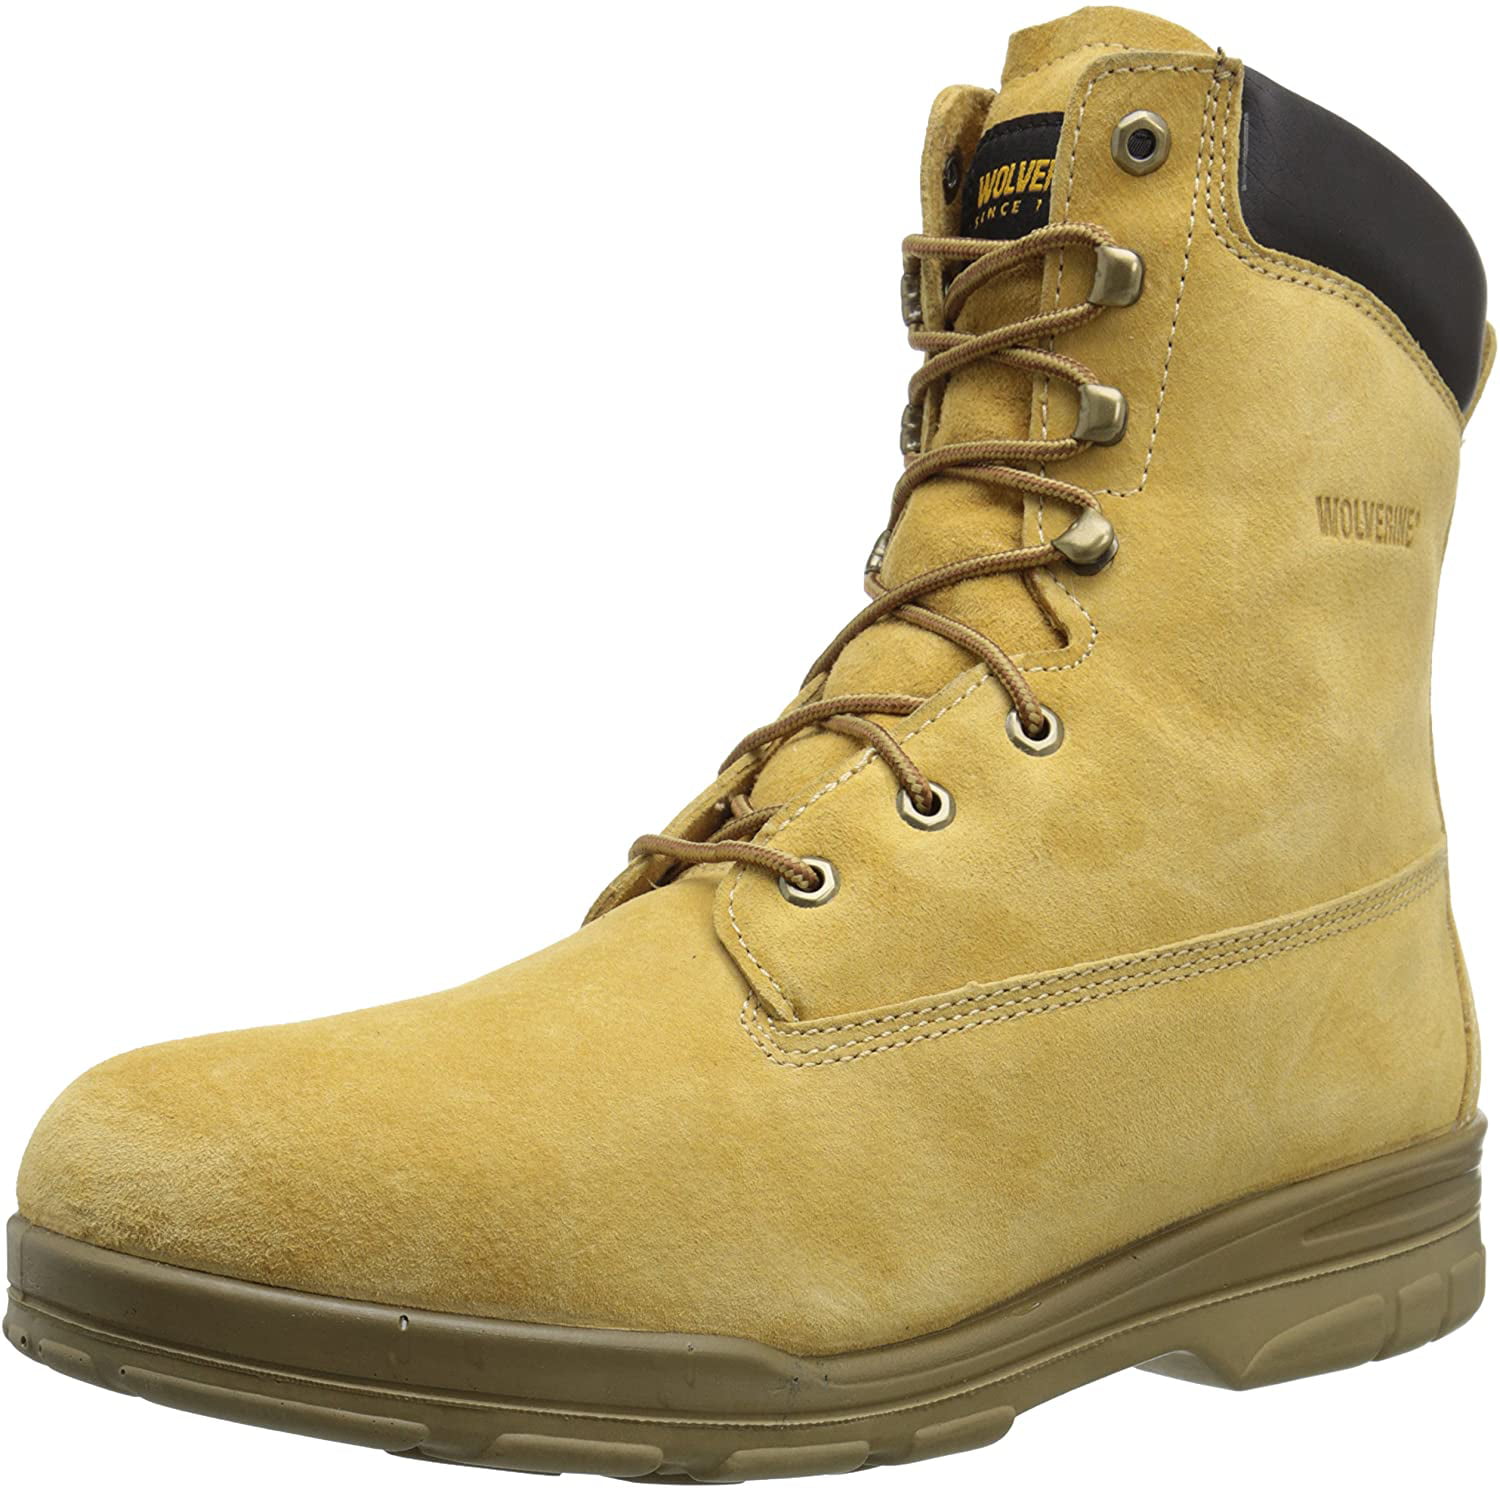 wolverine trappeur boots